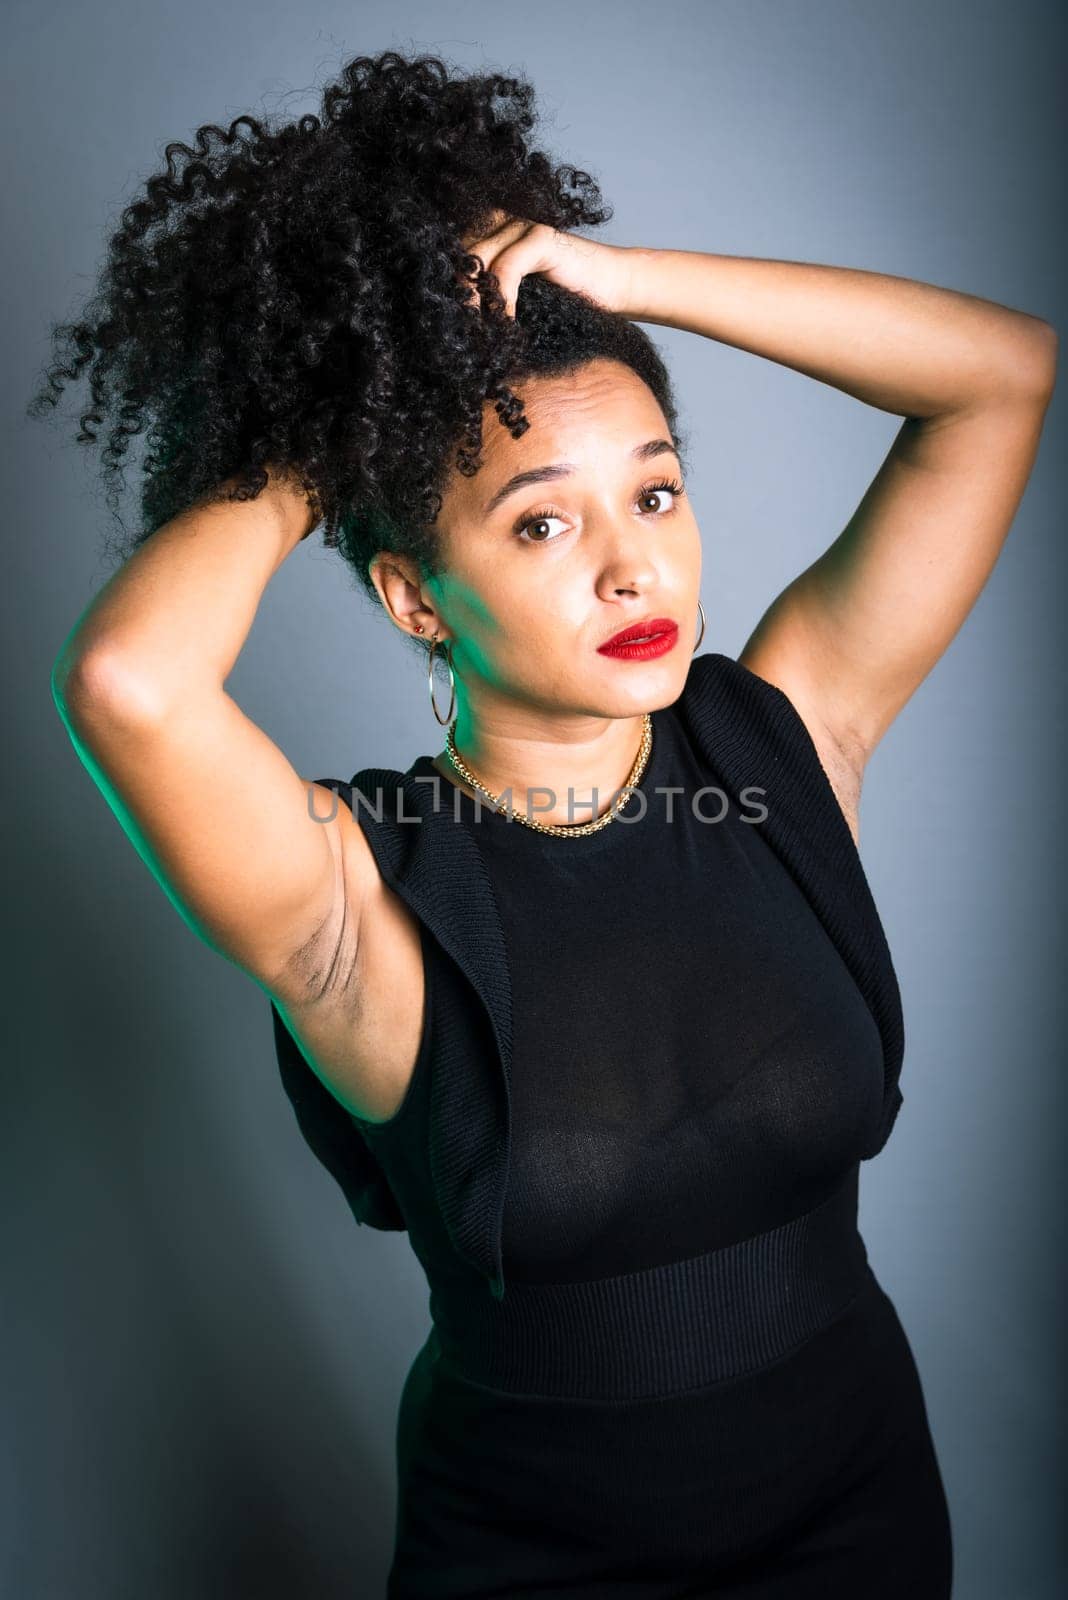 Beautiful young woman standing against gray background messing with her black hair. studio portrait